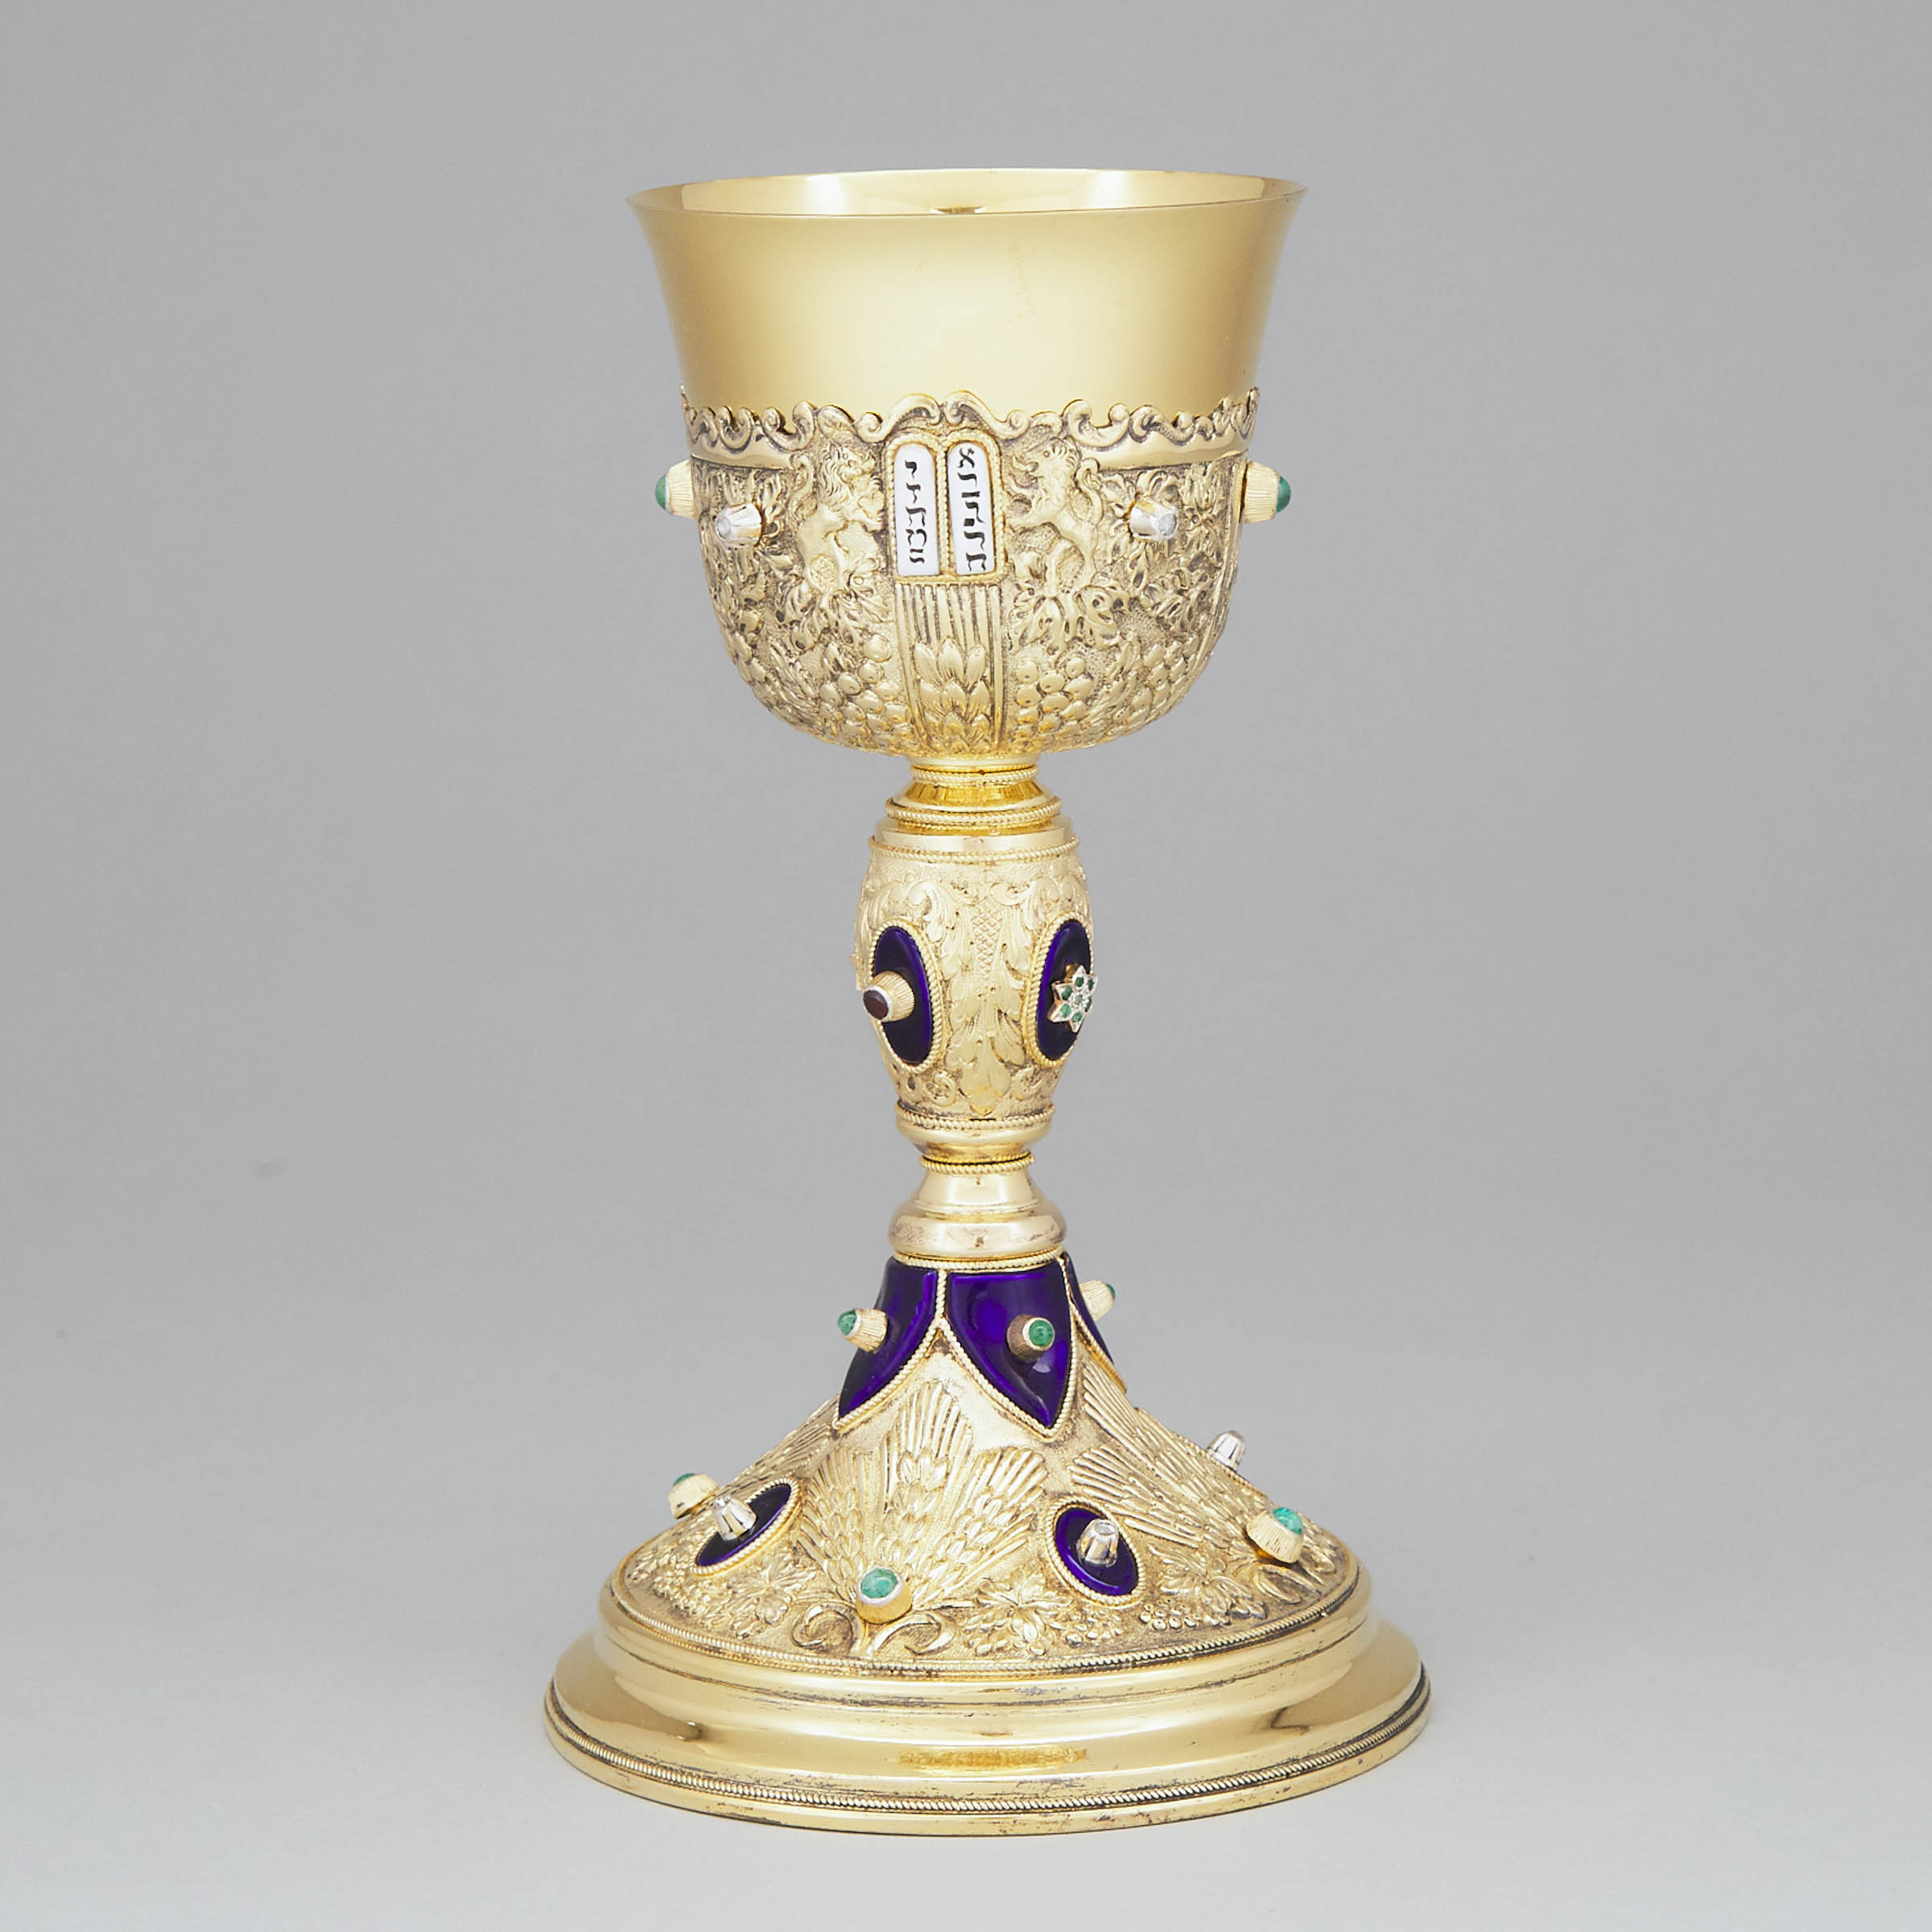 Continental Enameled Silver-Gilt Large Goblet, 20th century 